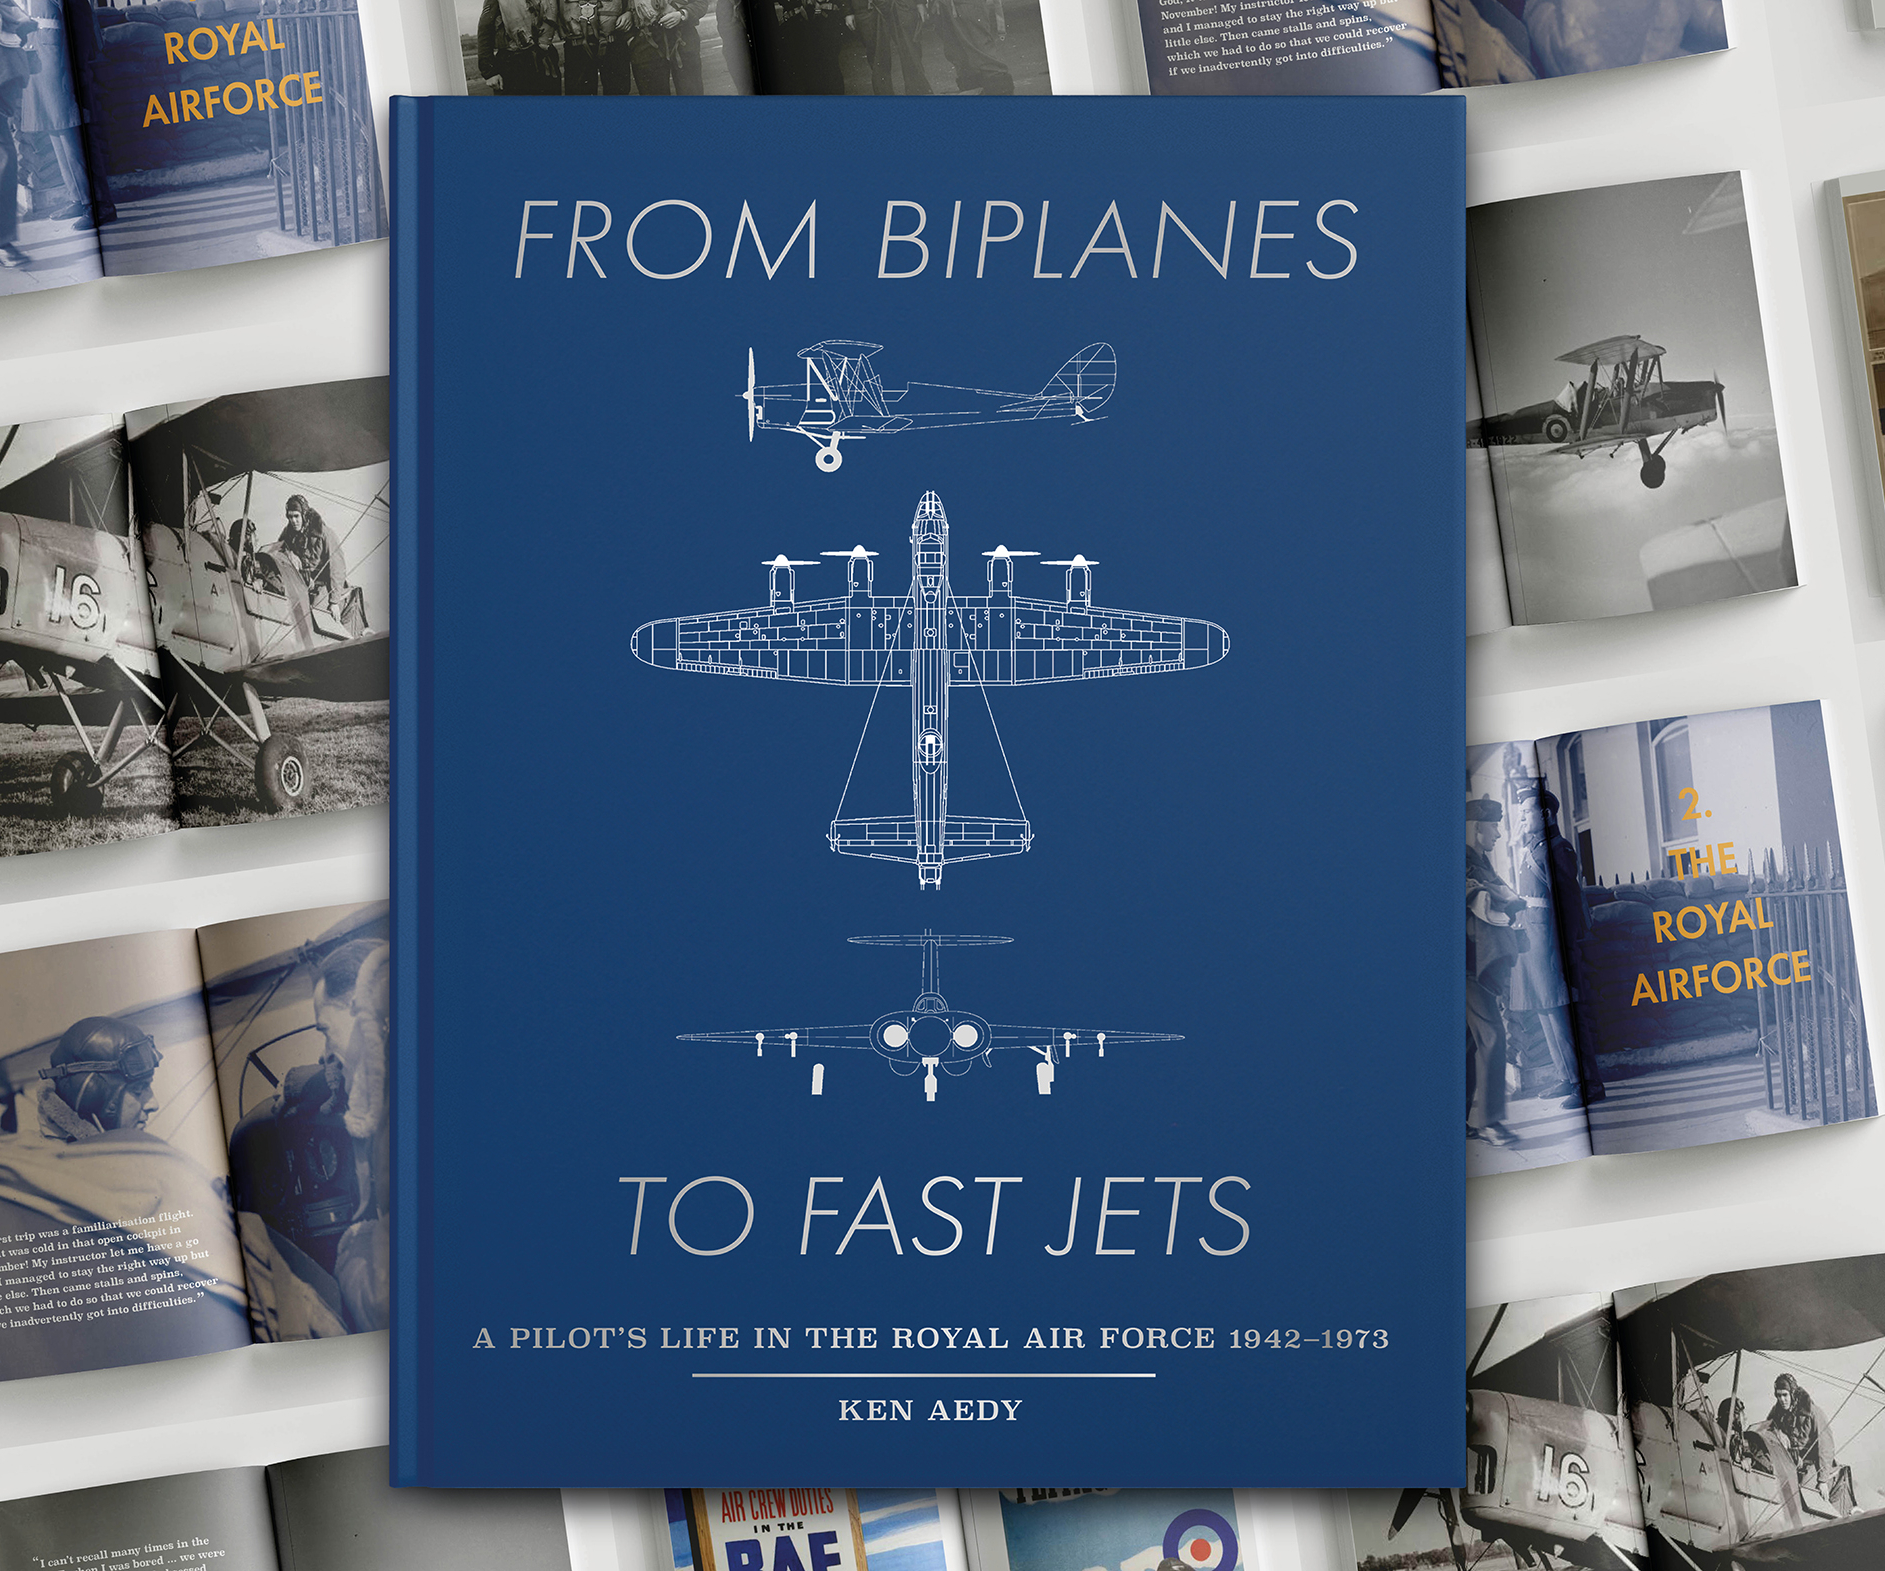 From Biplanes to Fast Jets